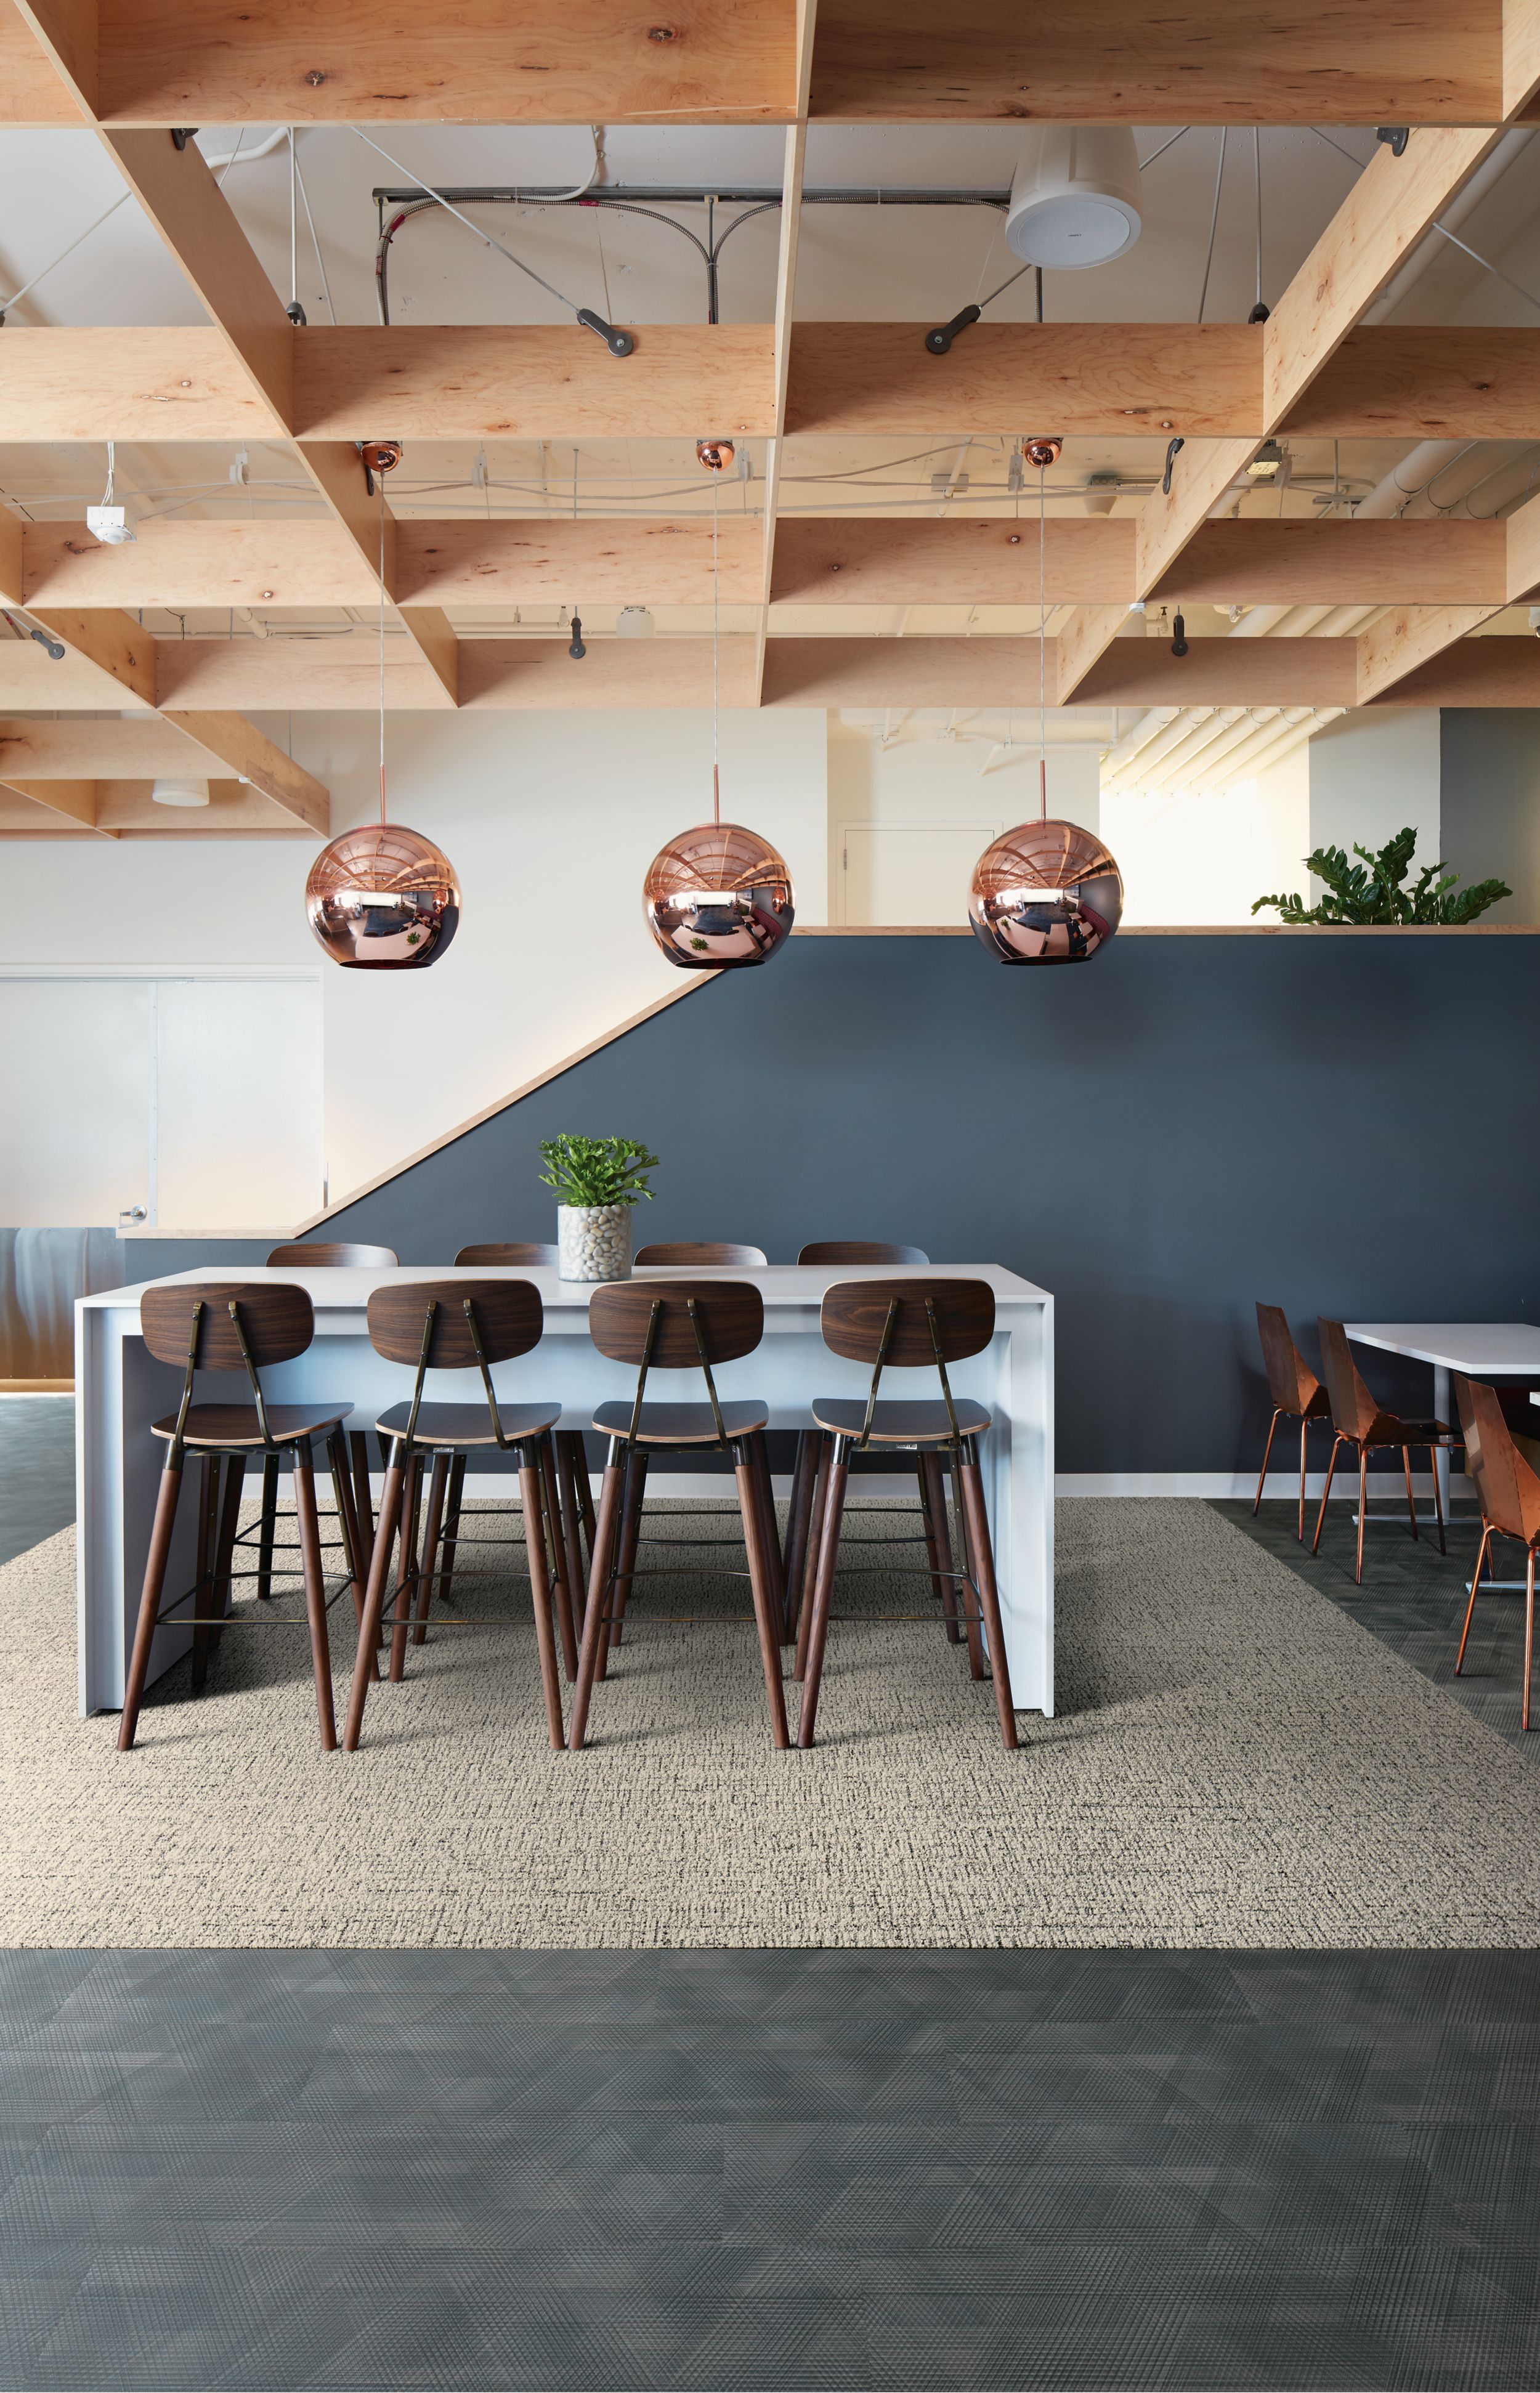 Interface Haptic plank carpet tile and Drawn Lines LVT in public office space with wood grid ceiling afbeeldingnummer 6